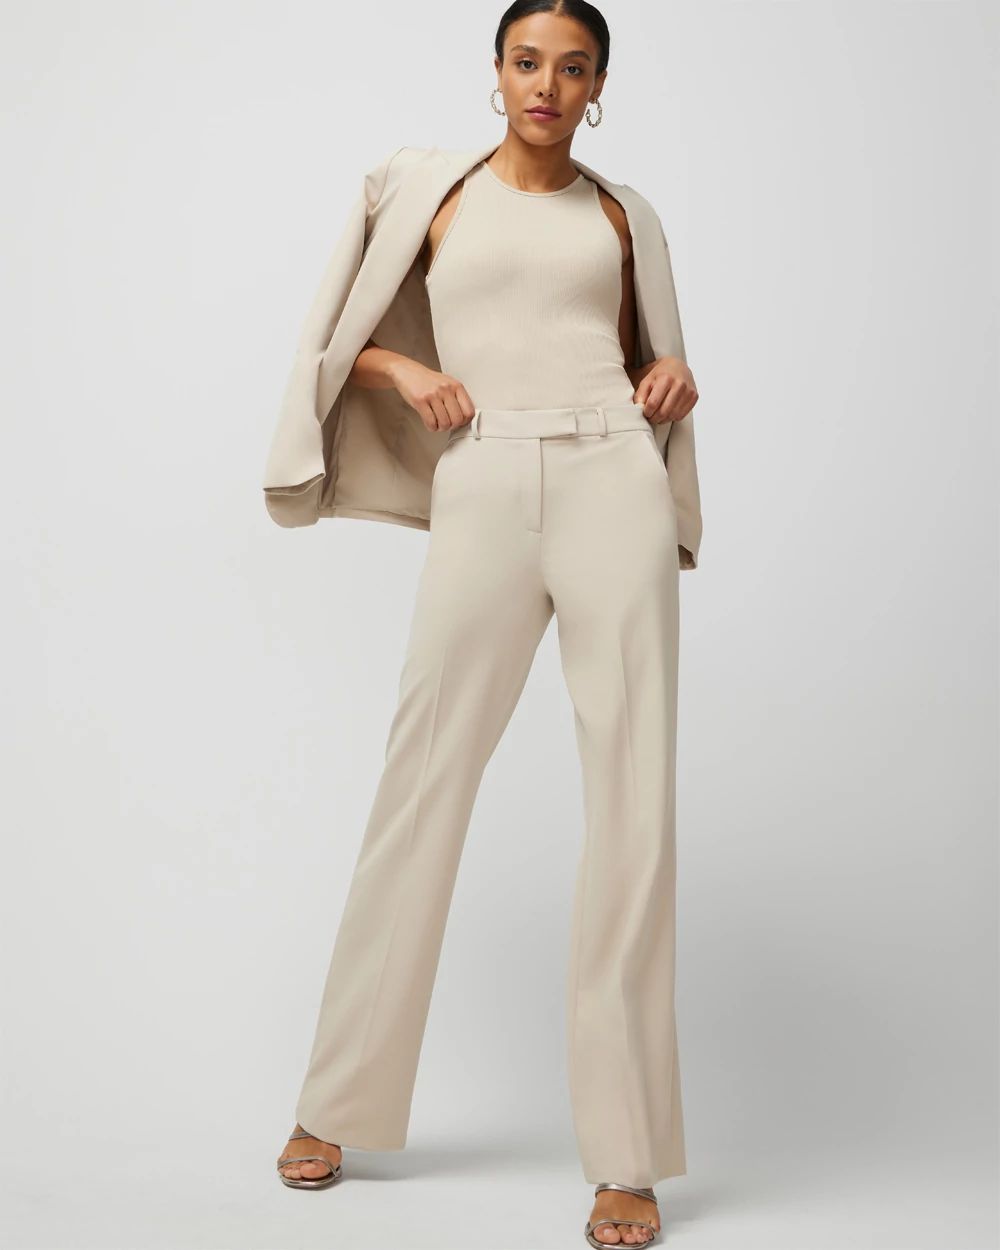 WHBM® Petite Luna Wide Leg Trouser click to view larger image.